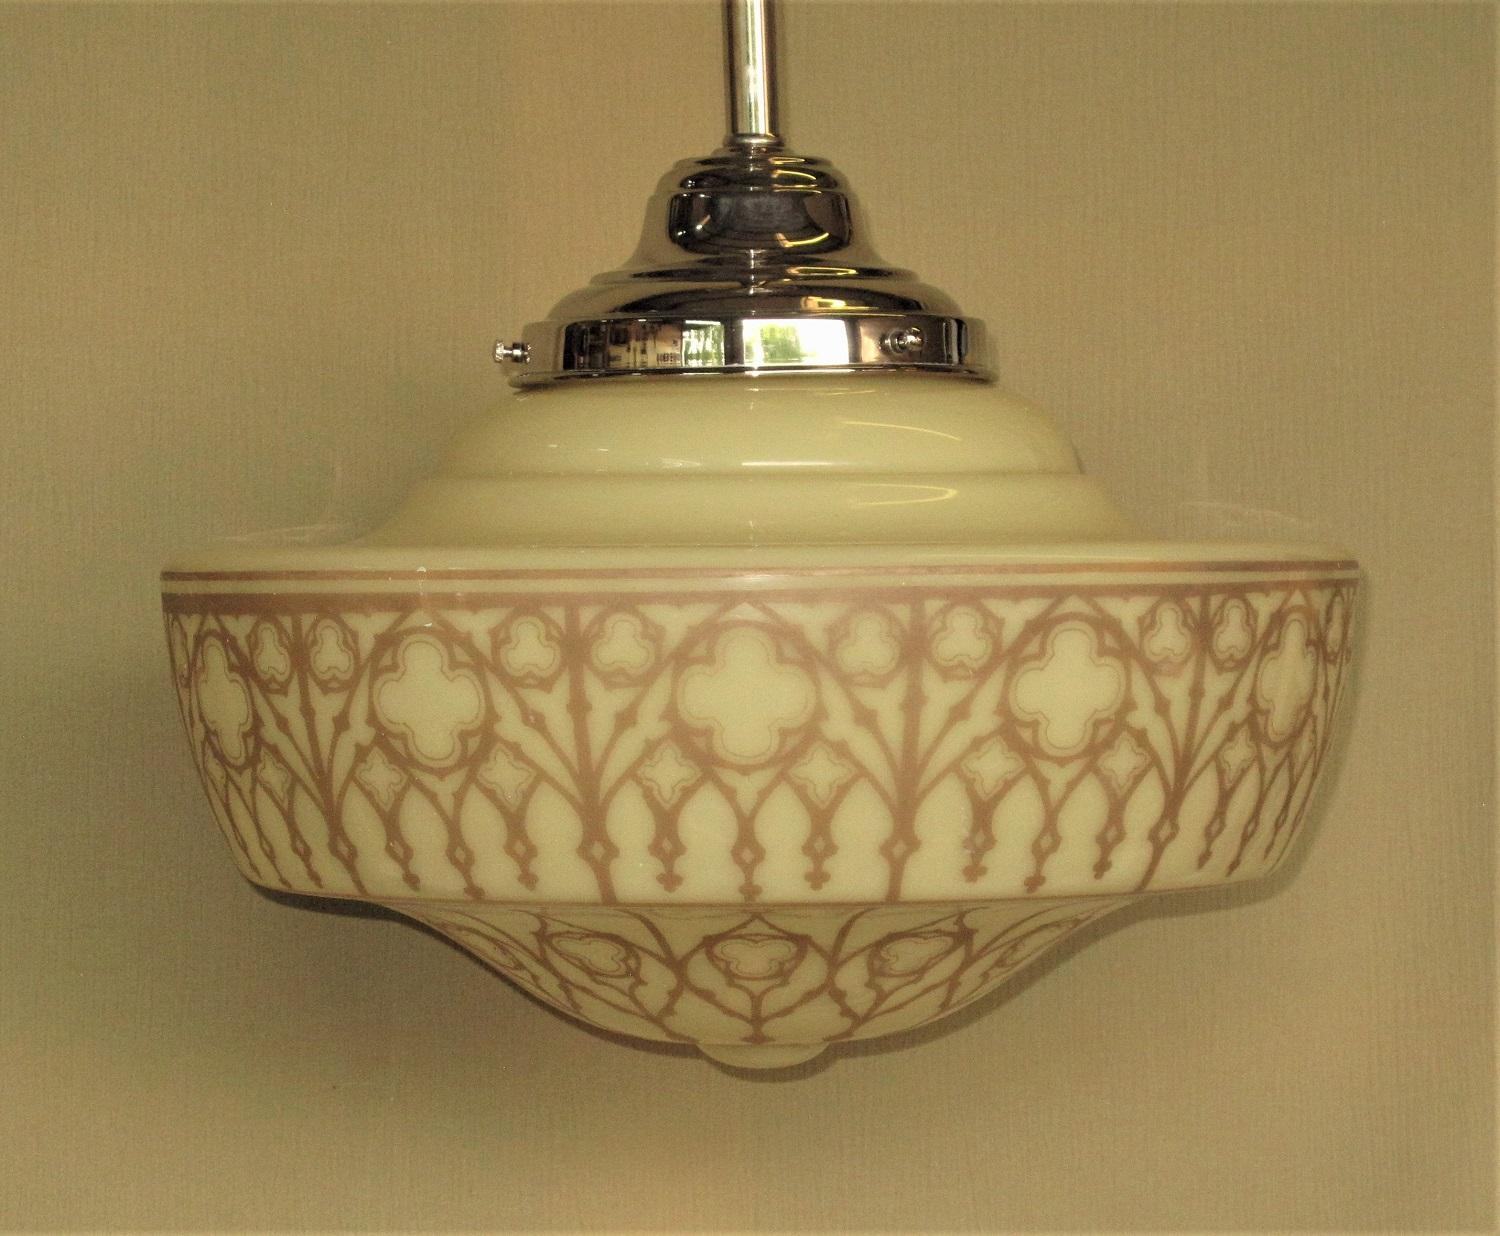 Priced for the pair.
Large and opulent fixtures out of a church in the Mid-west we were told. Divine Art Deco inspired design with trefoils, quatrefoils, Moorish arches, and a delicate latticework Surrounding the globe. The soft tan colored design